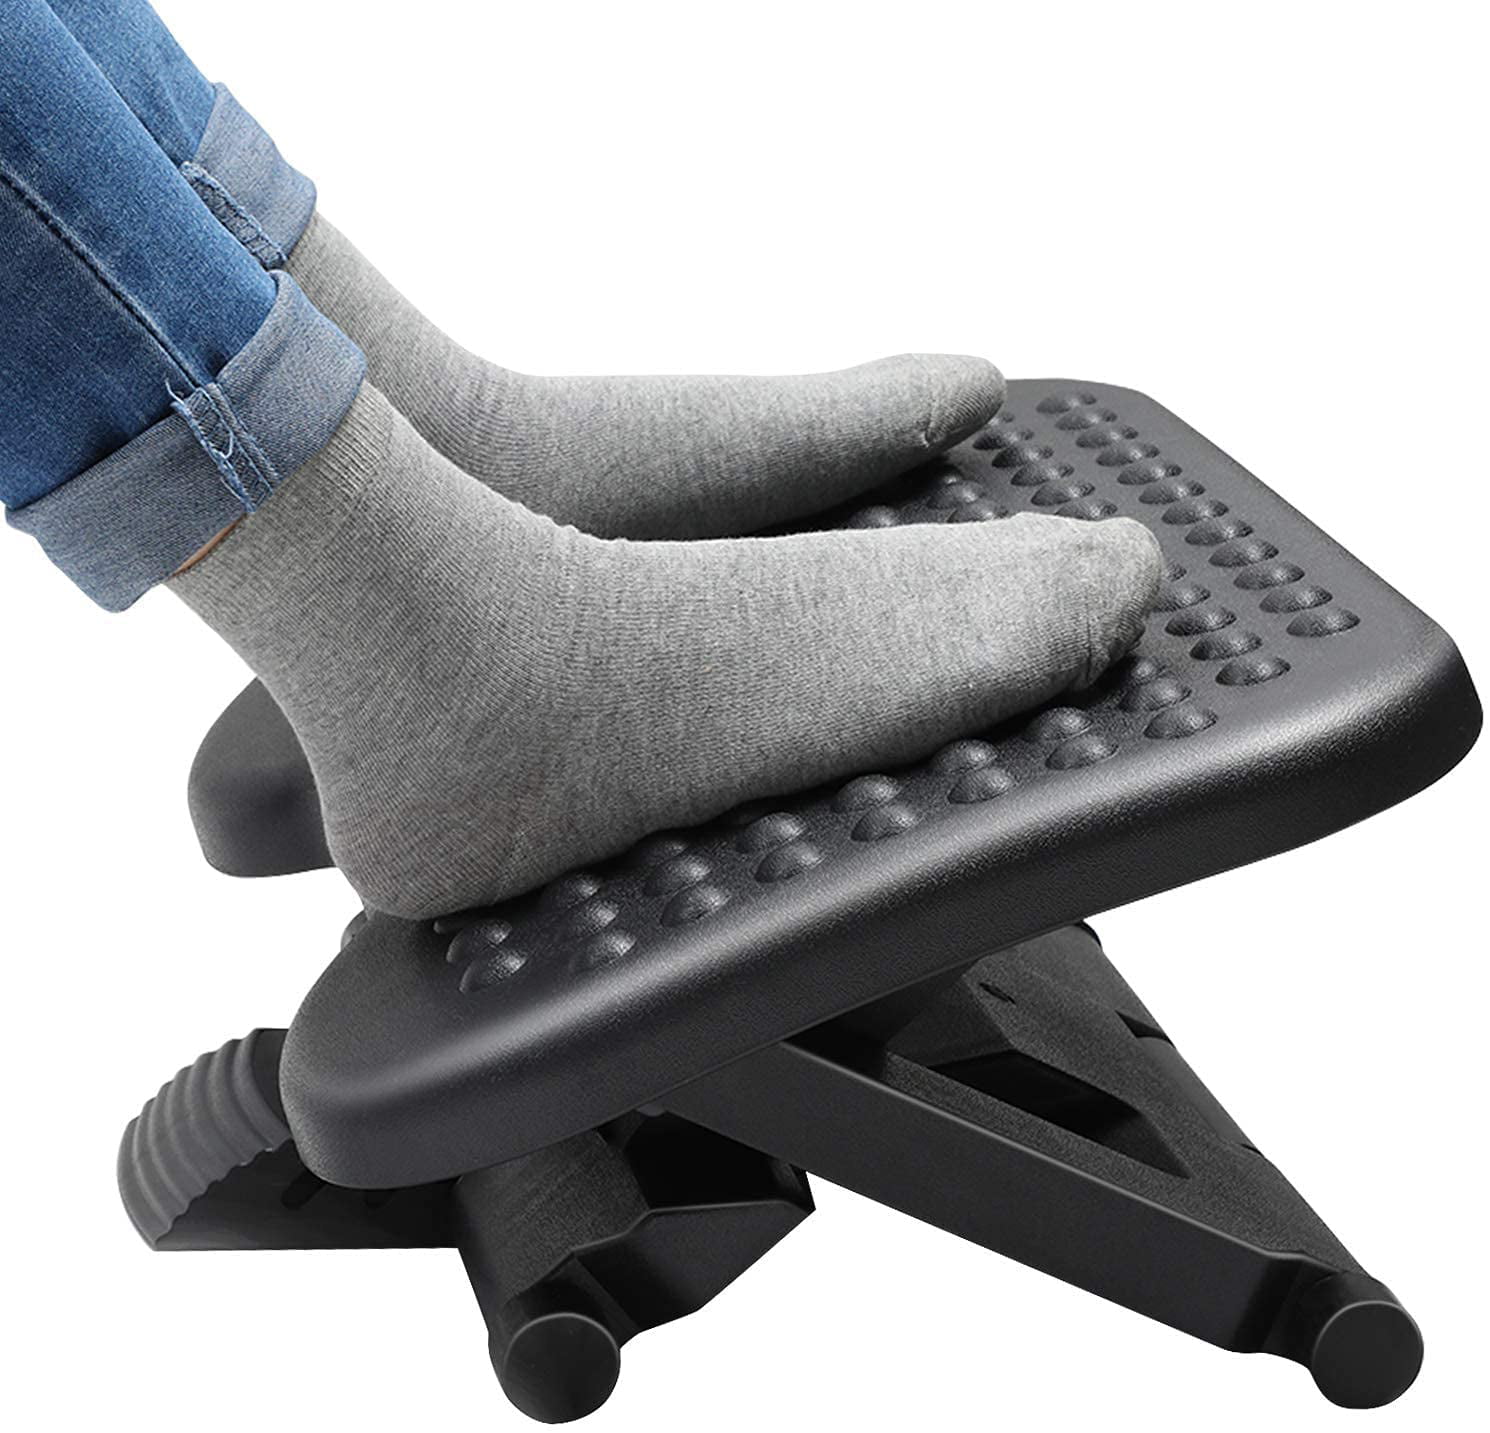 3 Adjustable Heights Under Desk Footrest, Improves Posture and Blood Circulation, Hold Up to 400lbs